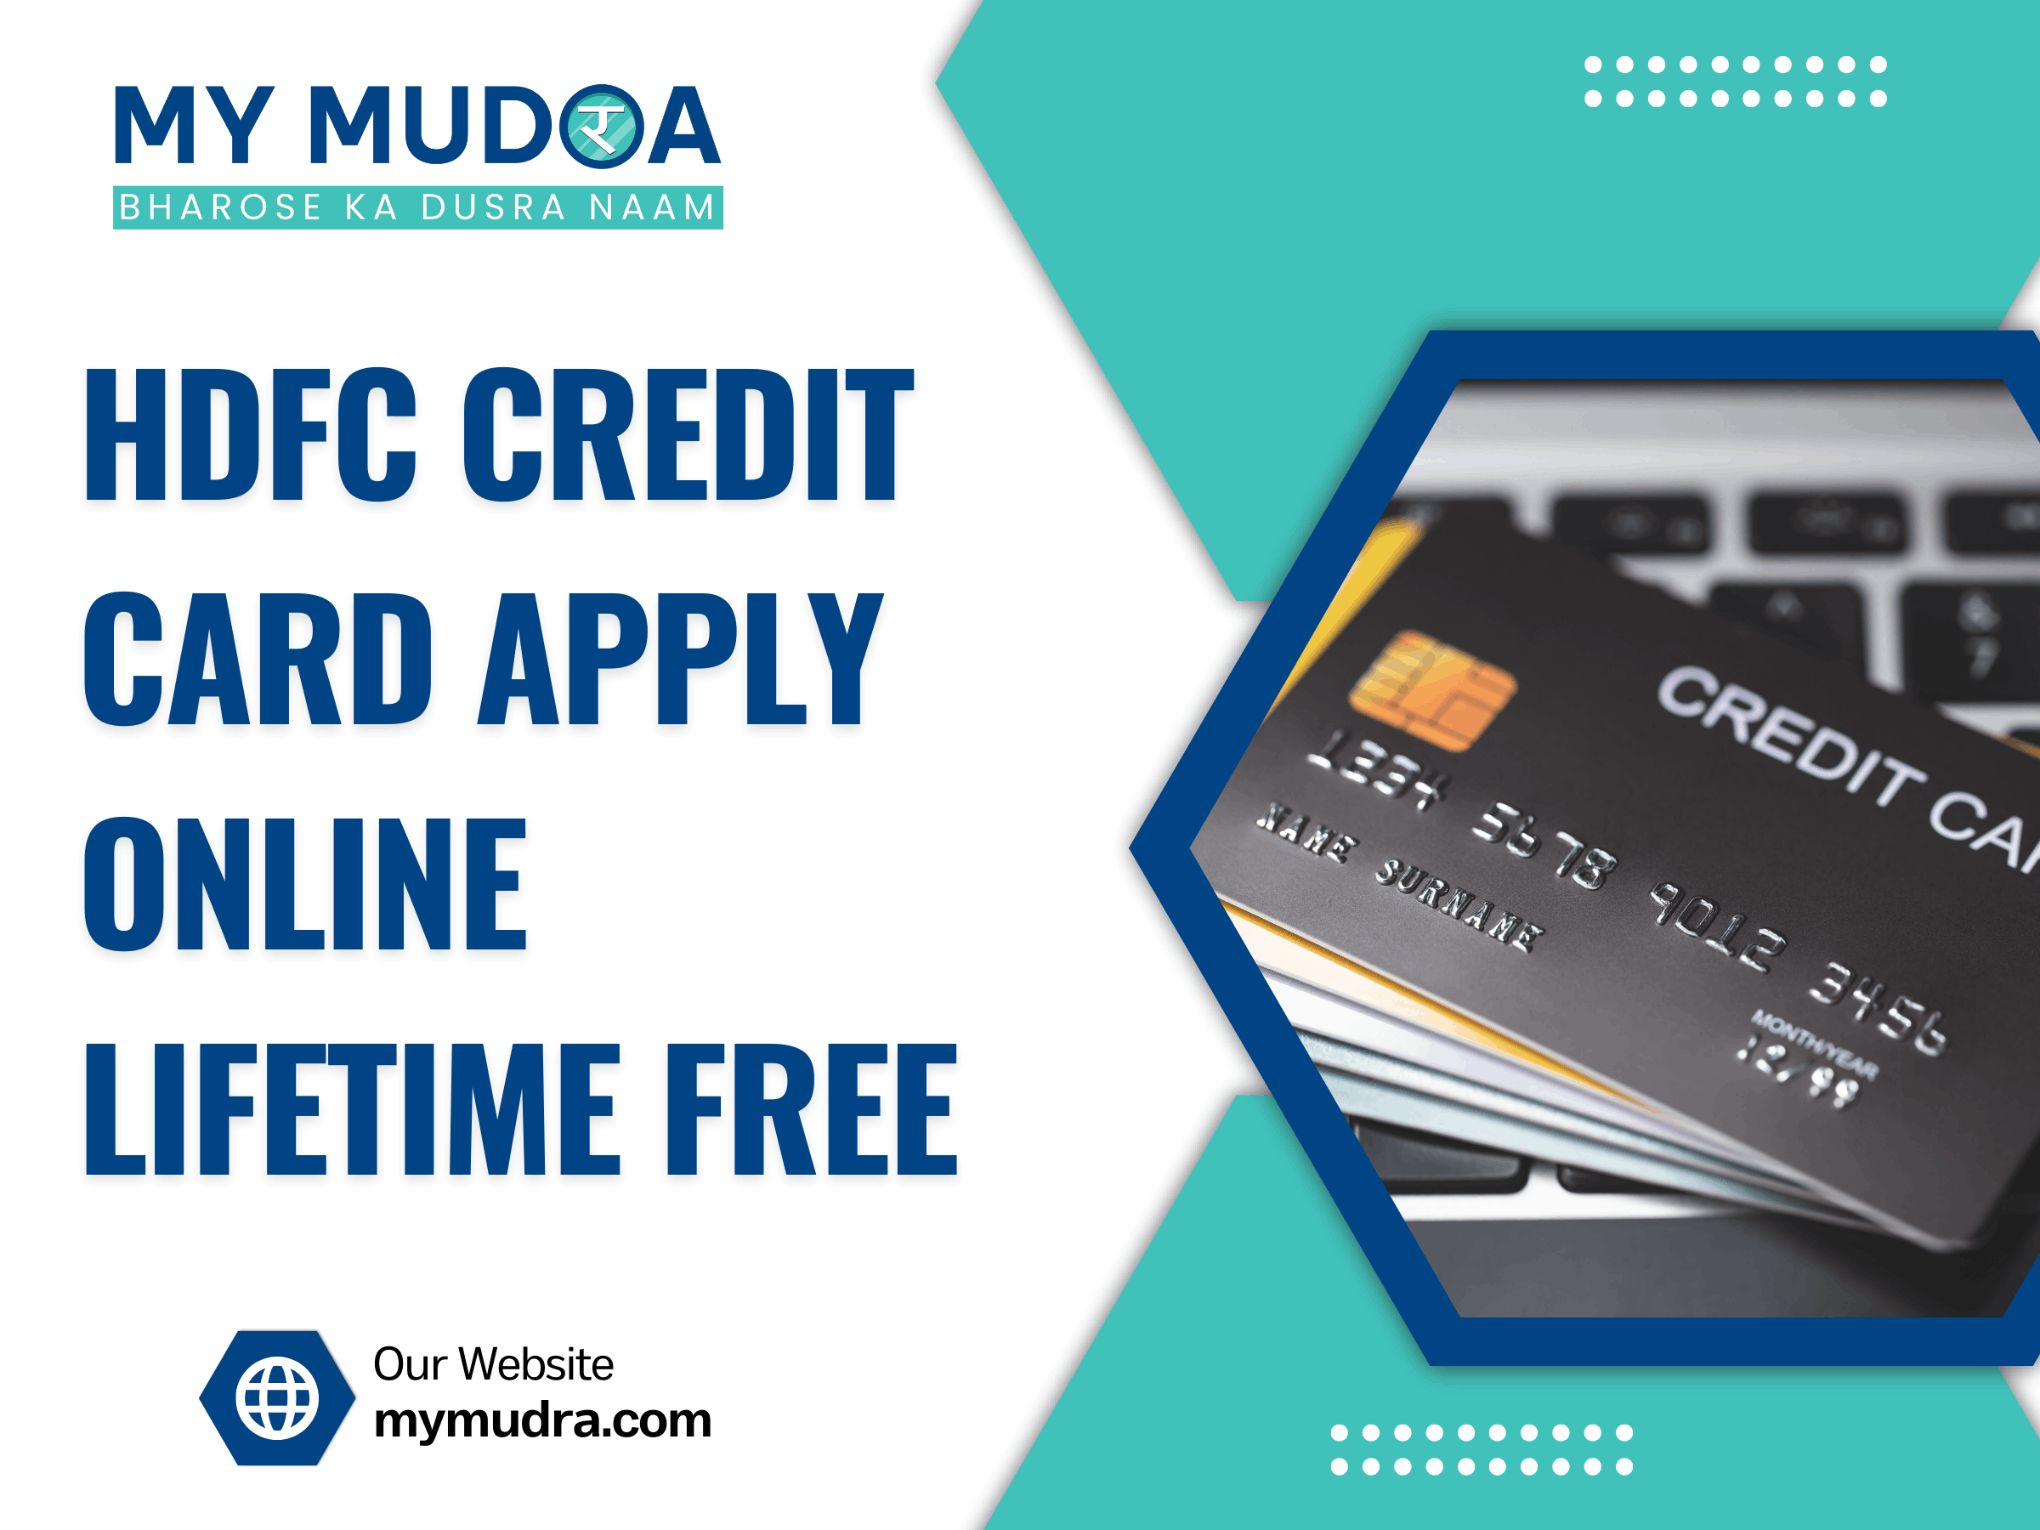 HDFC Credit Card Apply Online Lifetime Free